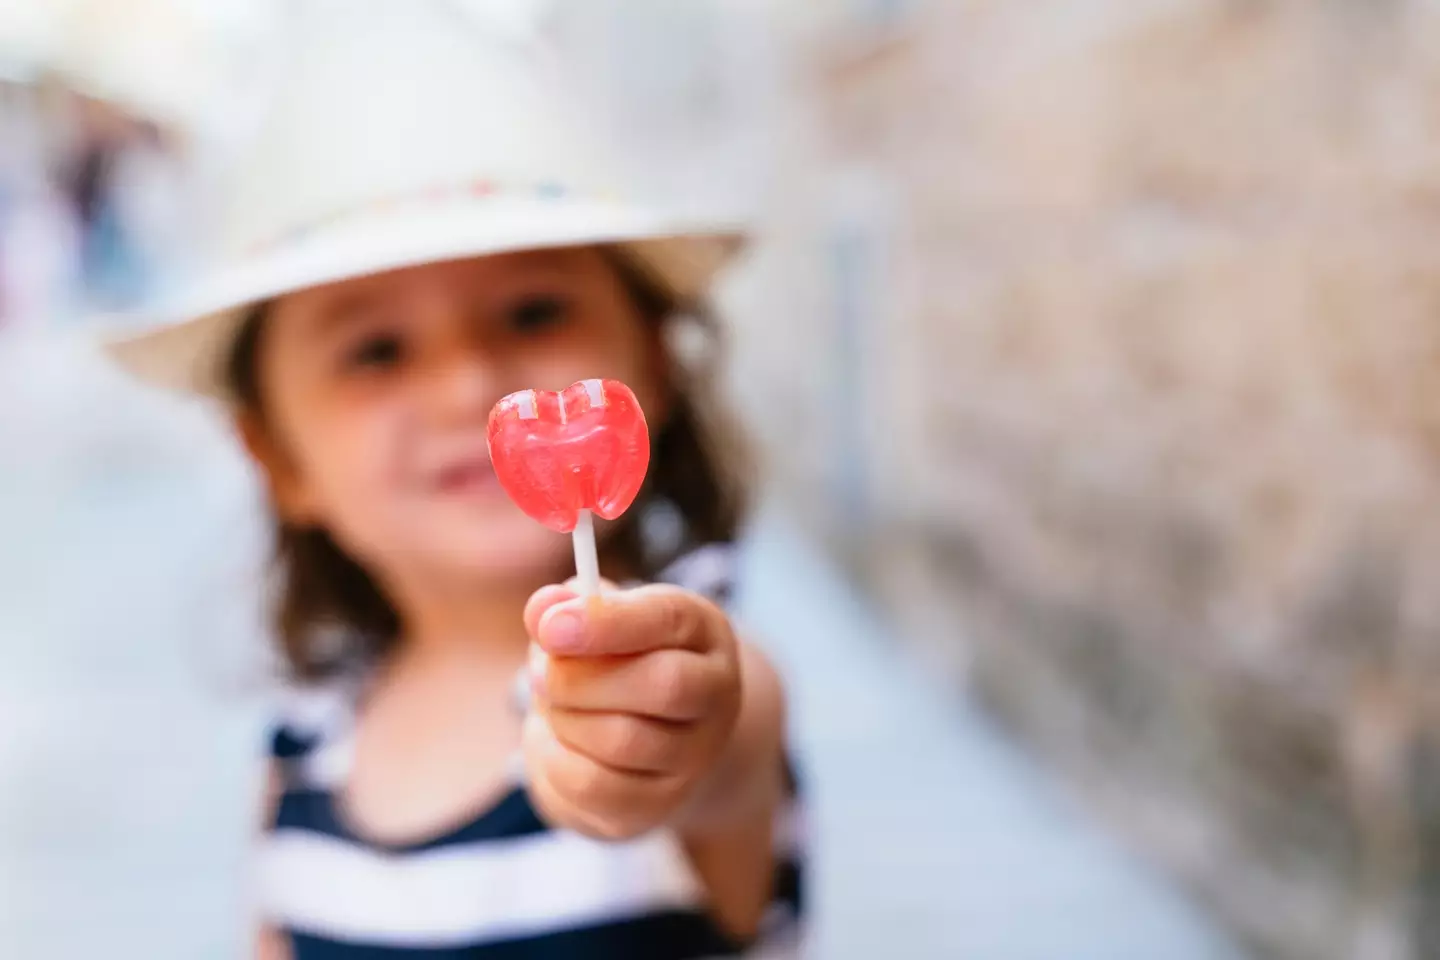 A mum has issued a warning over sour lollipops after her child suffered a devastating burn to their tongue (